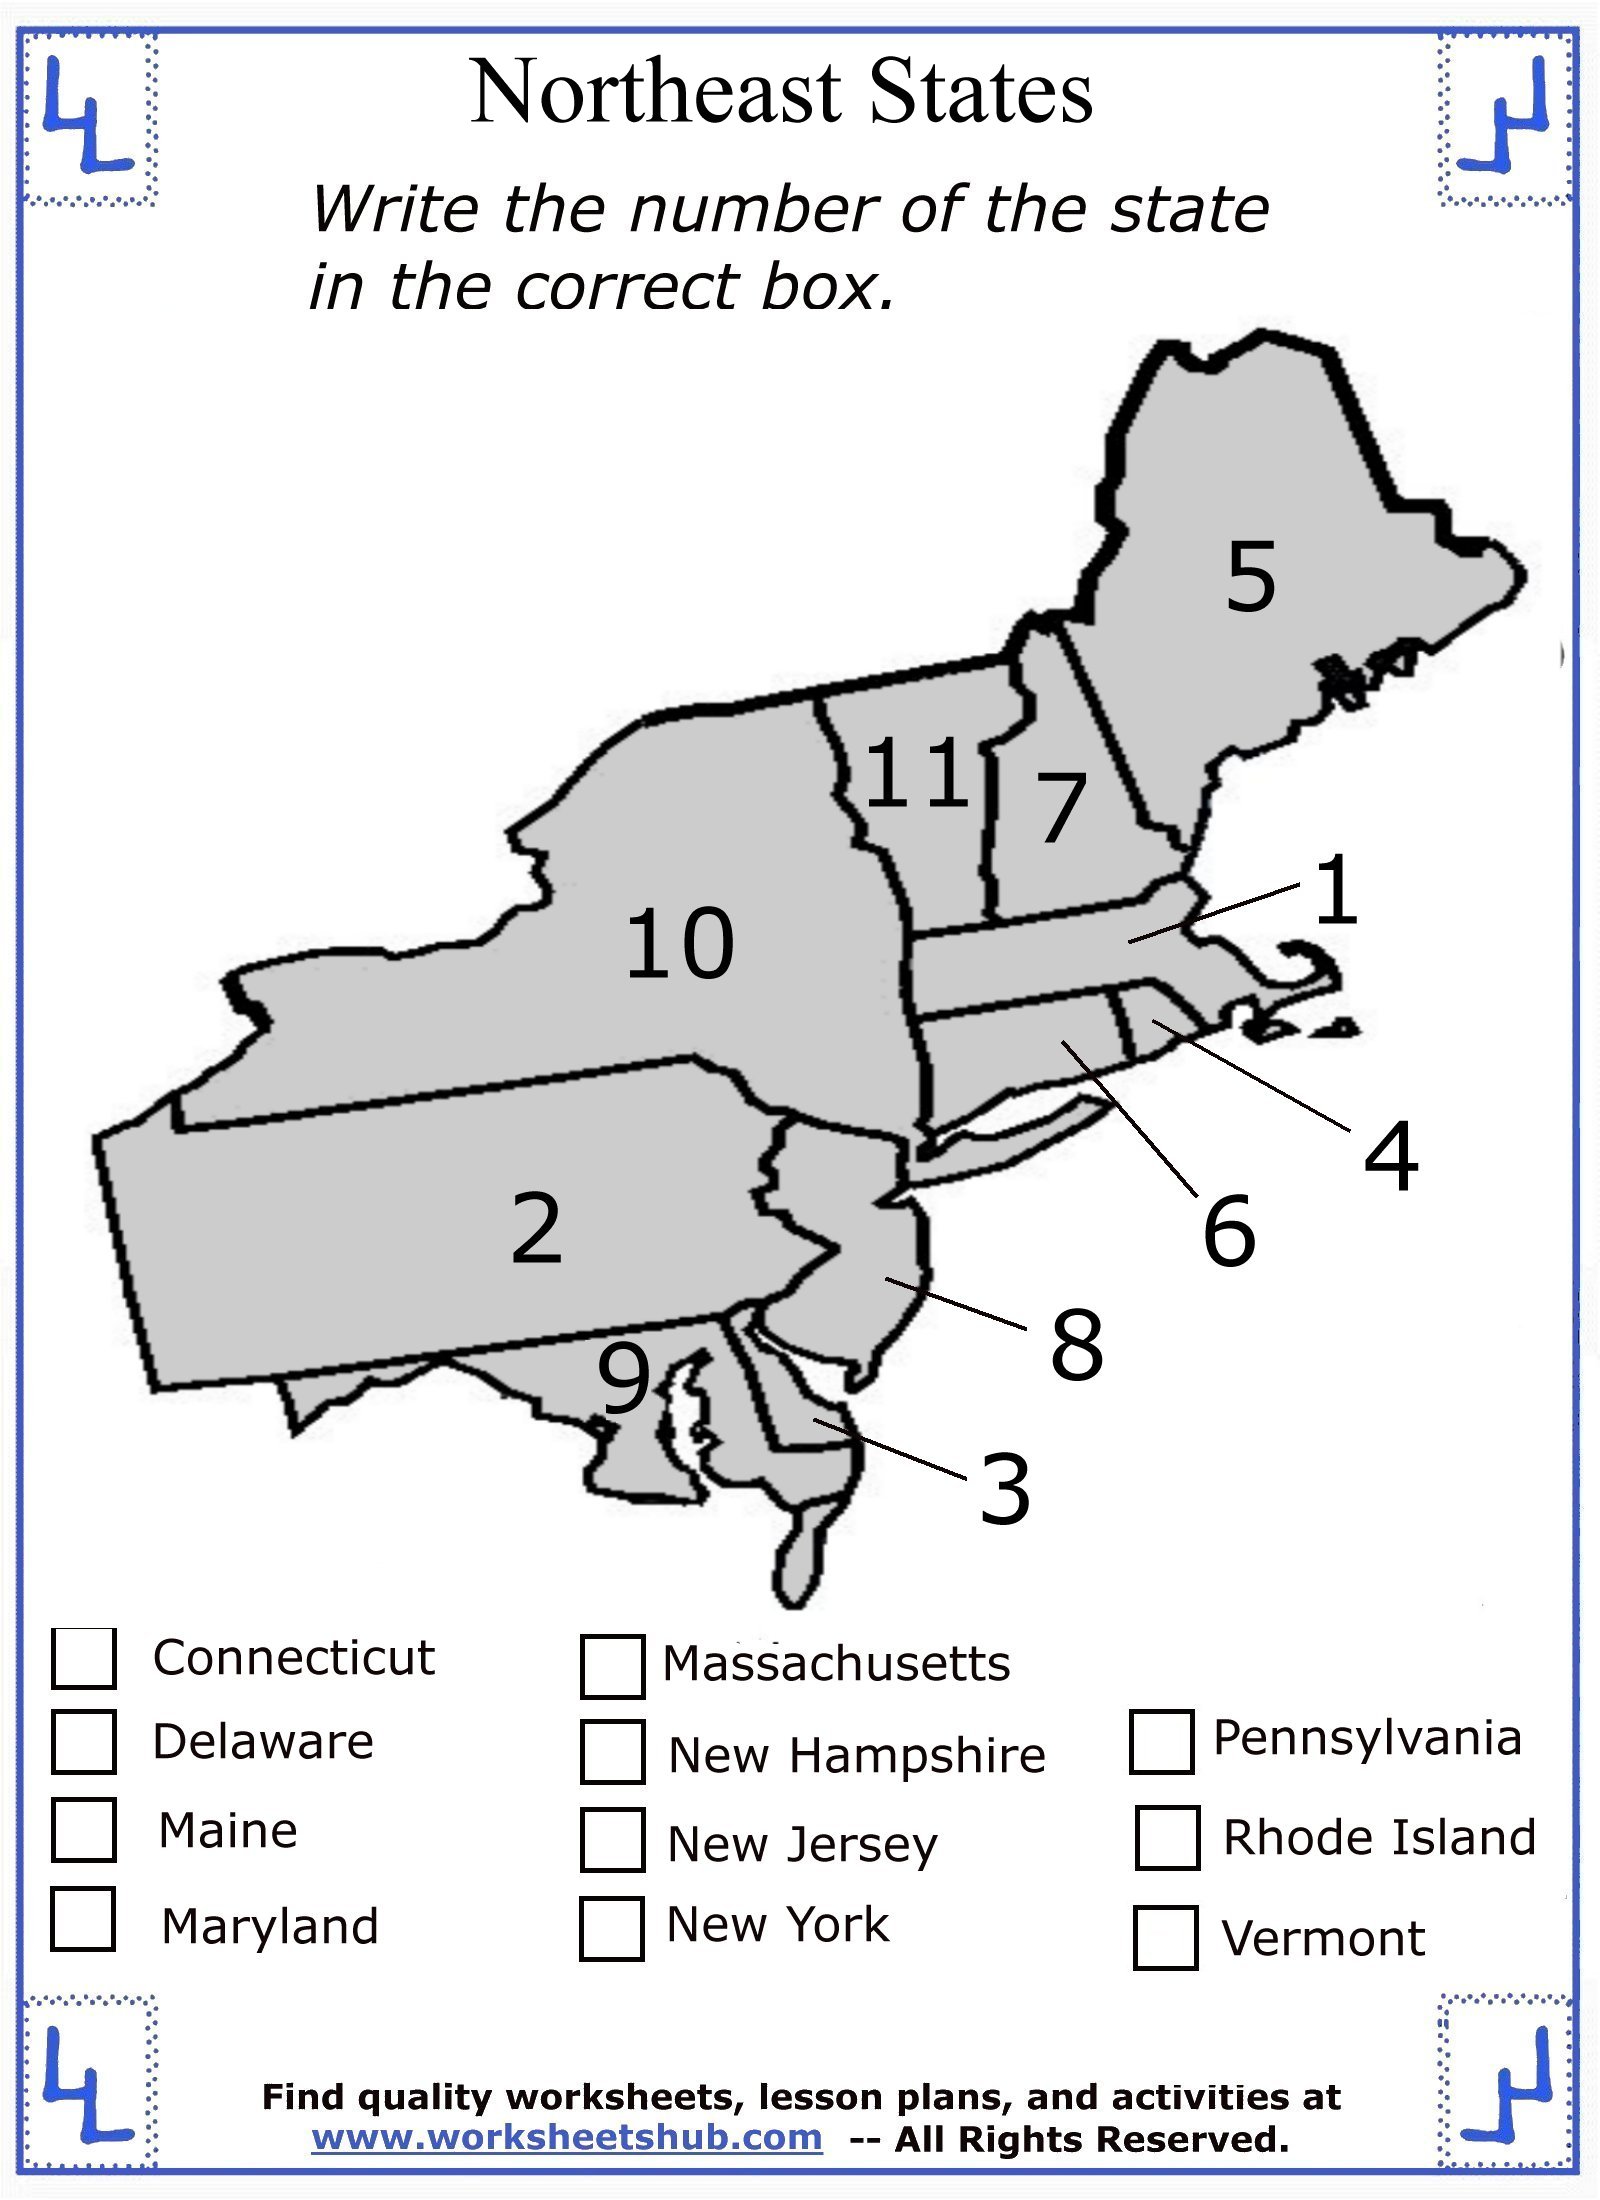 fourth-grade-social-studies-northeast-region-states-and-capitals